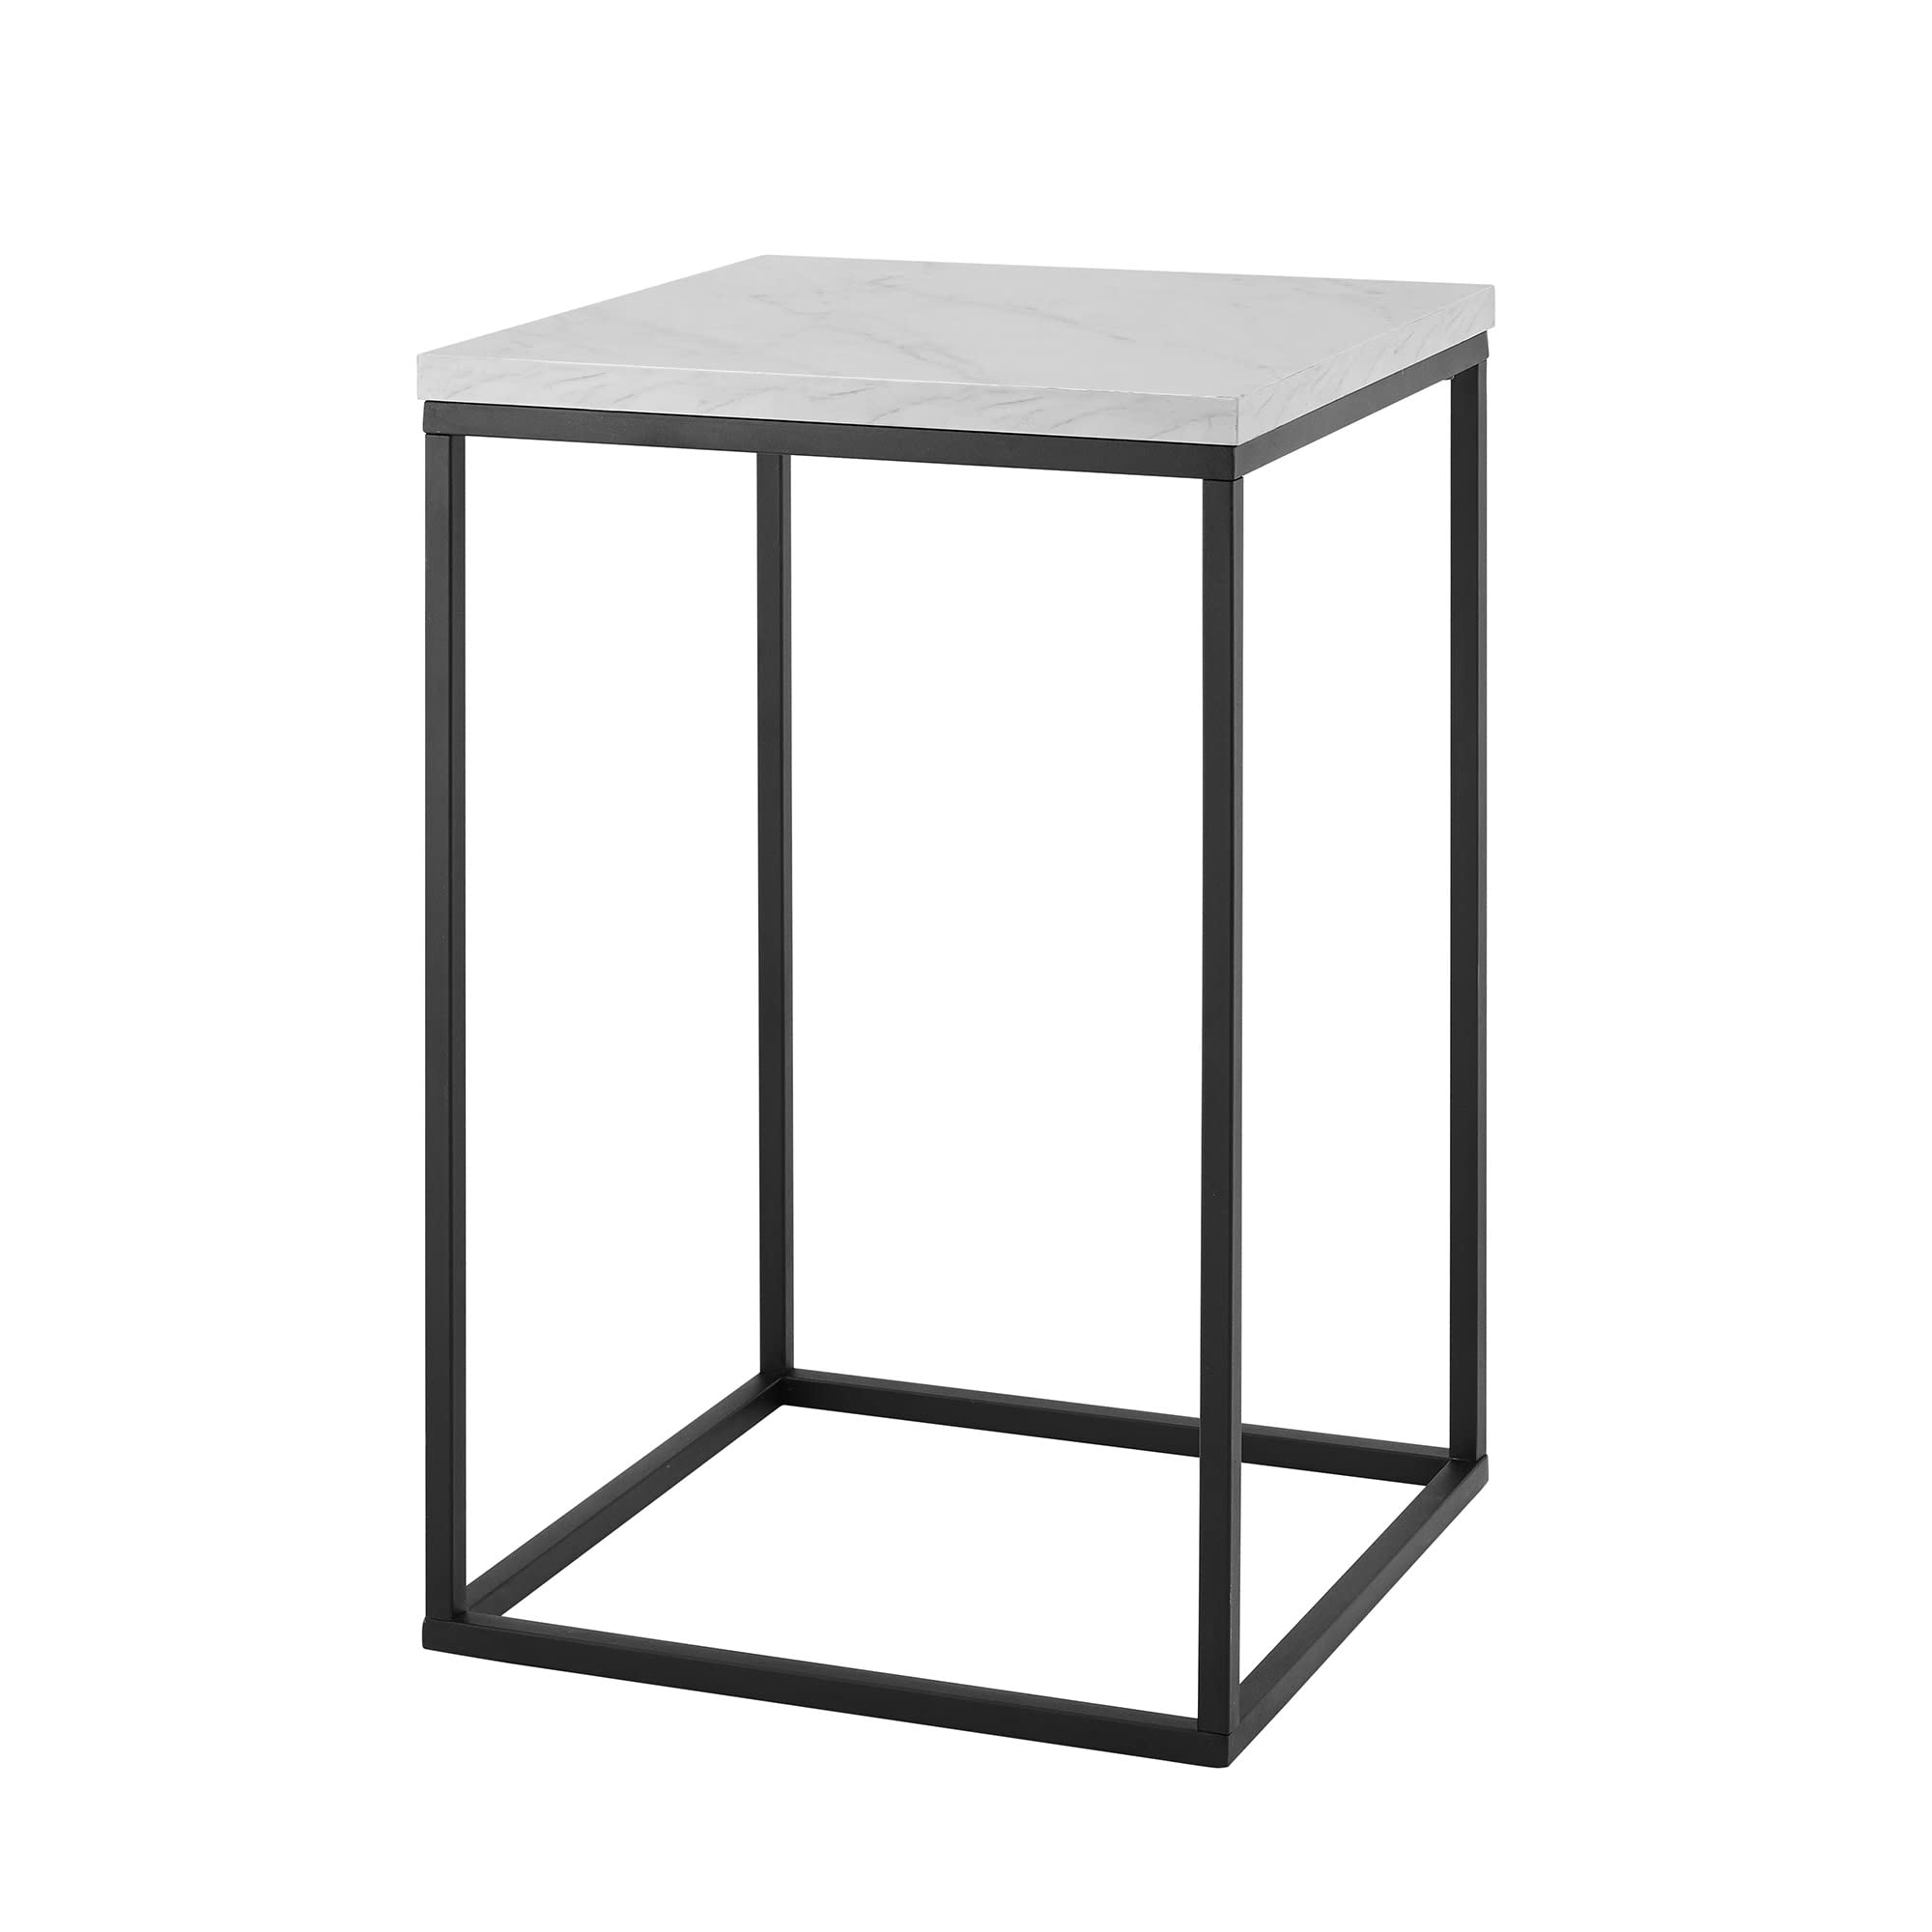 16" Walker Edison Modern Open Square Wood Side Accent End Table (Marble) $36 + Free Shipping